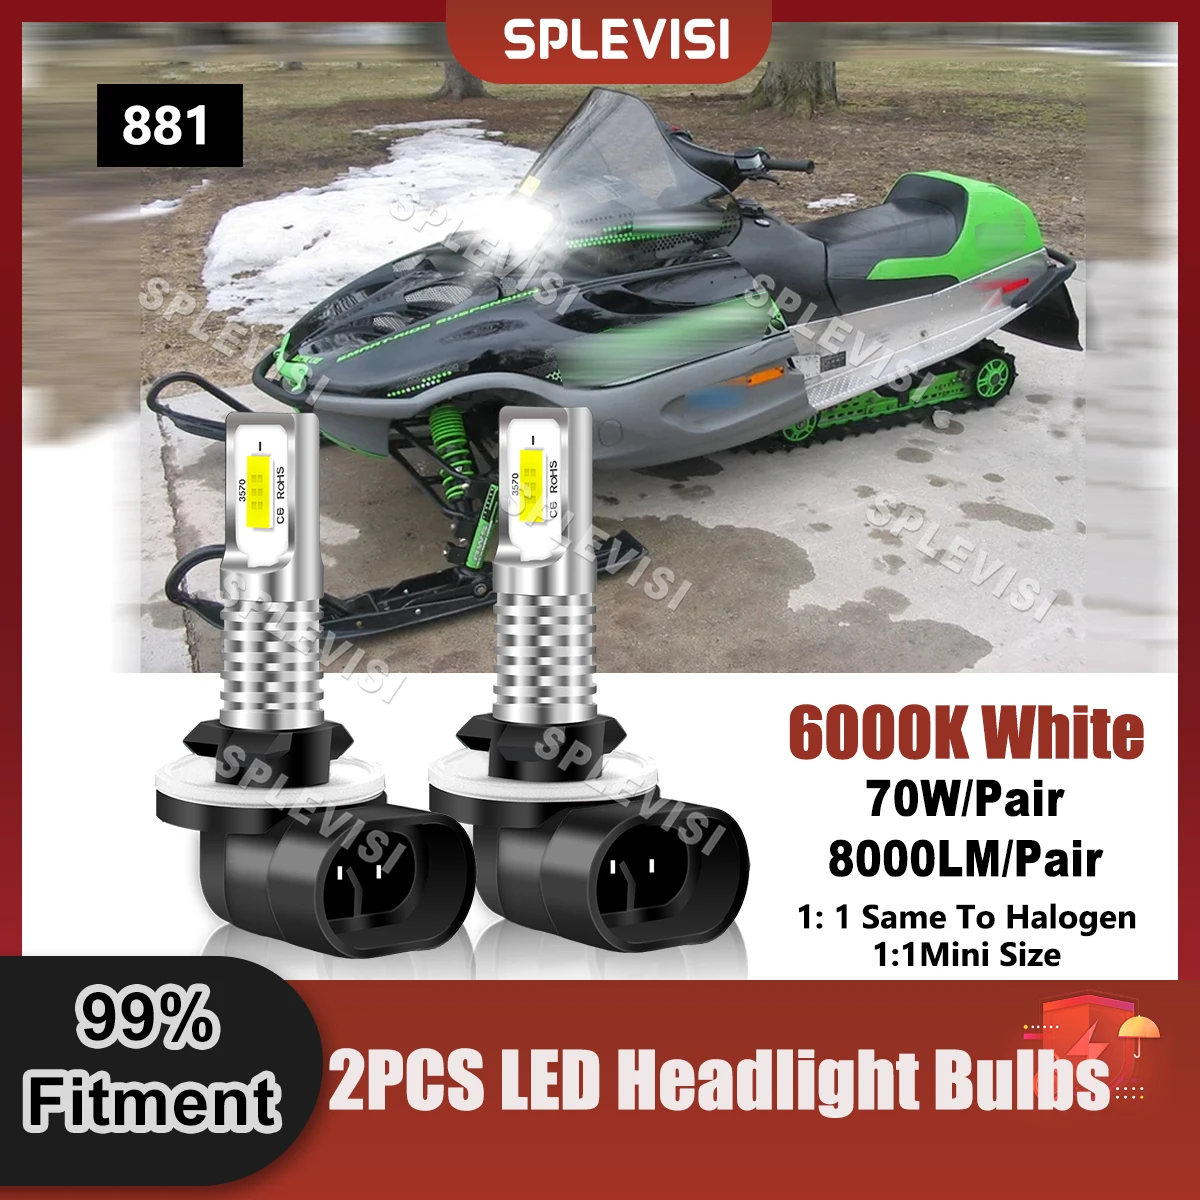 1 Pair Upgrade 881 LED Headlight Pure White For Arctic Cat ZR 500 1998 1999 2000 2001 2002 ZR 600 EFI 1998 1999 2000 2001 2002 2x 70w white led headlight for arctic cat bearcat 1996 2002 2018 2019 bearcat 340 1996 2002 bearcat 440 1996 2000 snowmoble